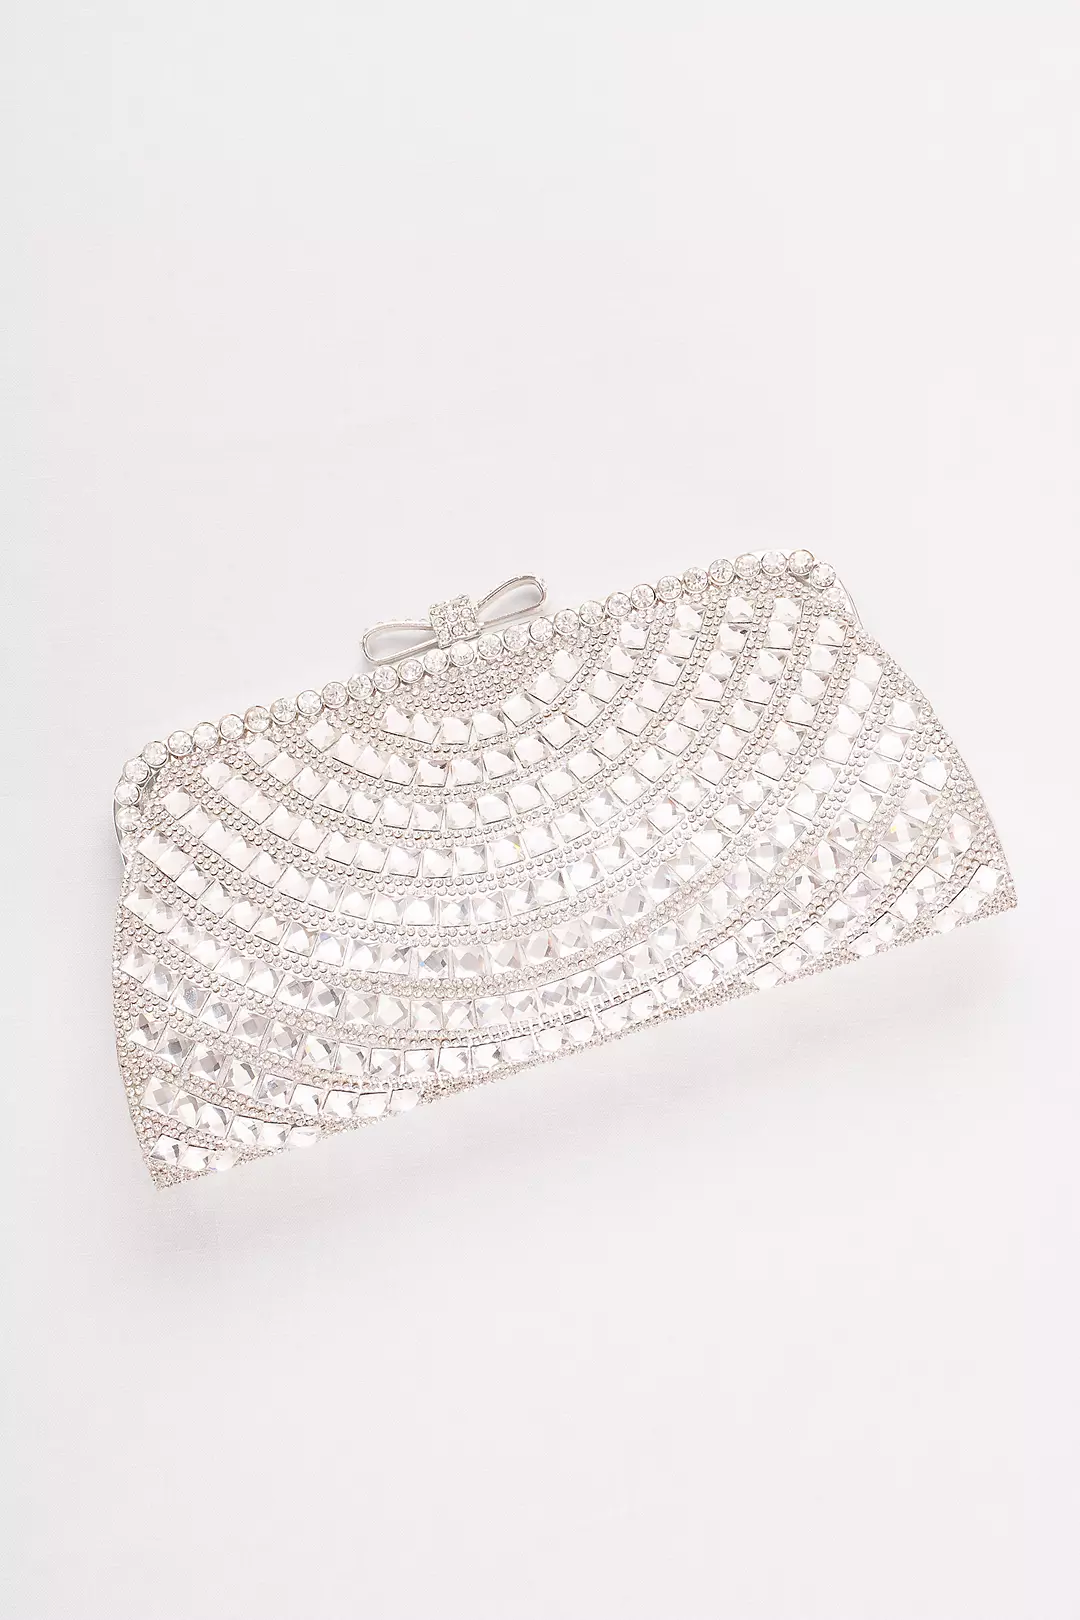 Allover Crystal Bow-Top Clutch Image